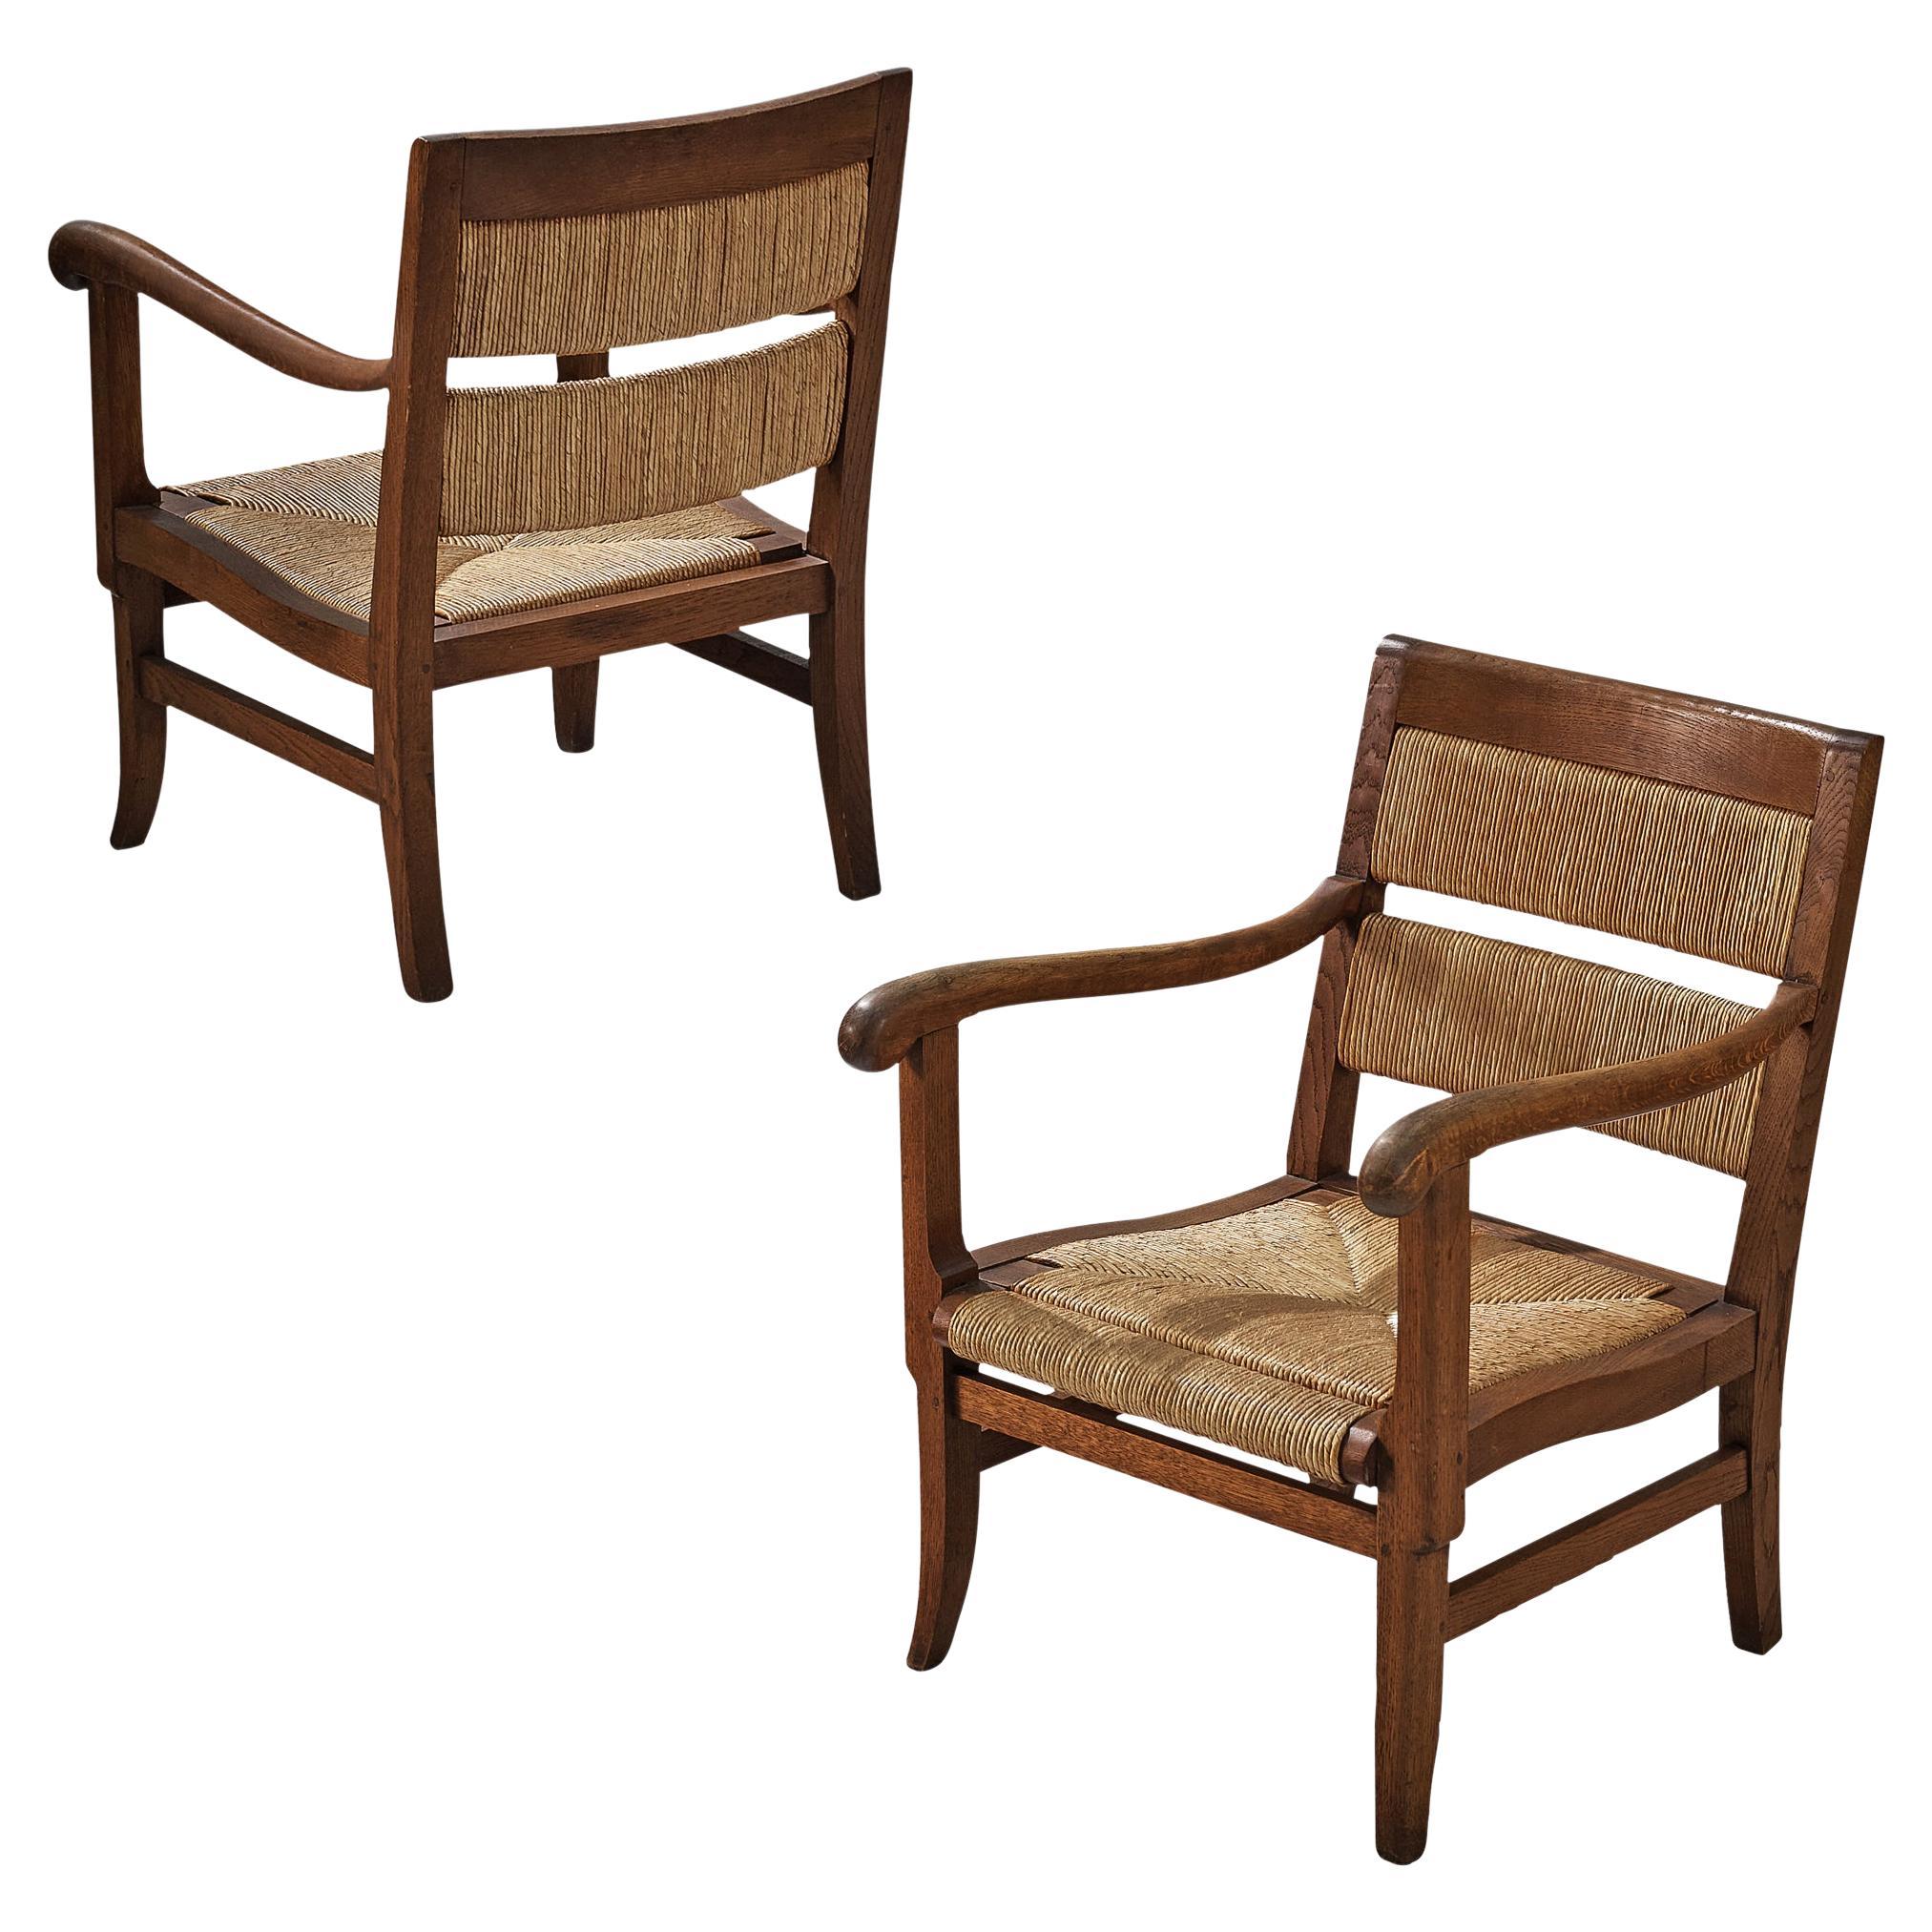 French Rustic Pair of Armchairs in Stained Oak and Straw